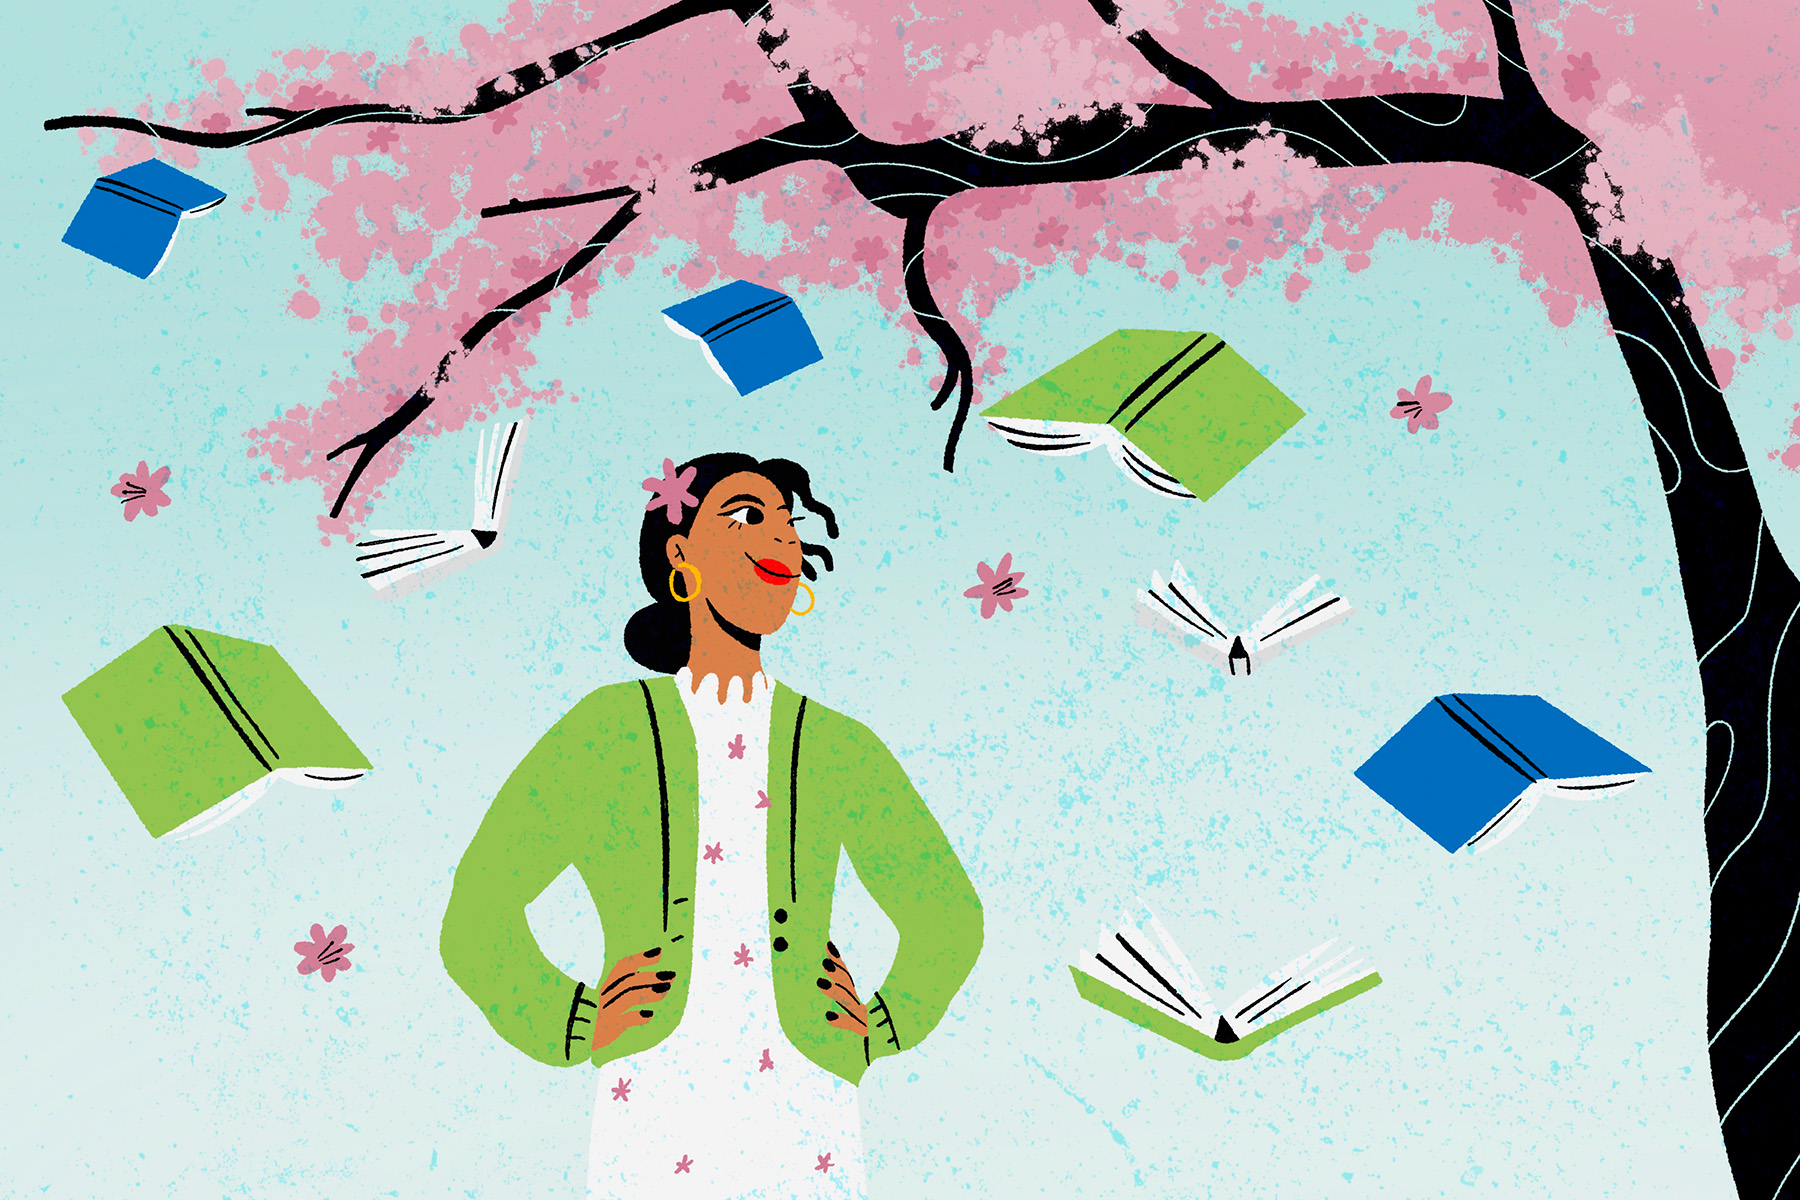 An illustration of a woman against an orange background standing beneath a tree that is shedding books like leaves